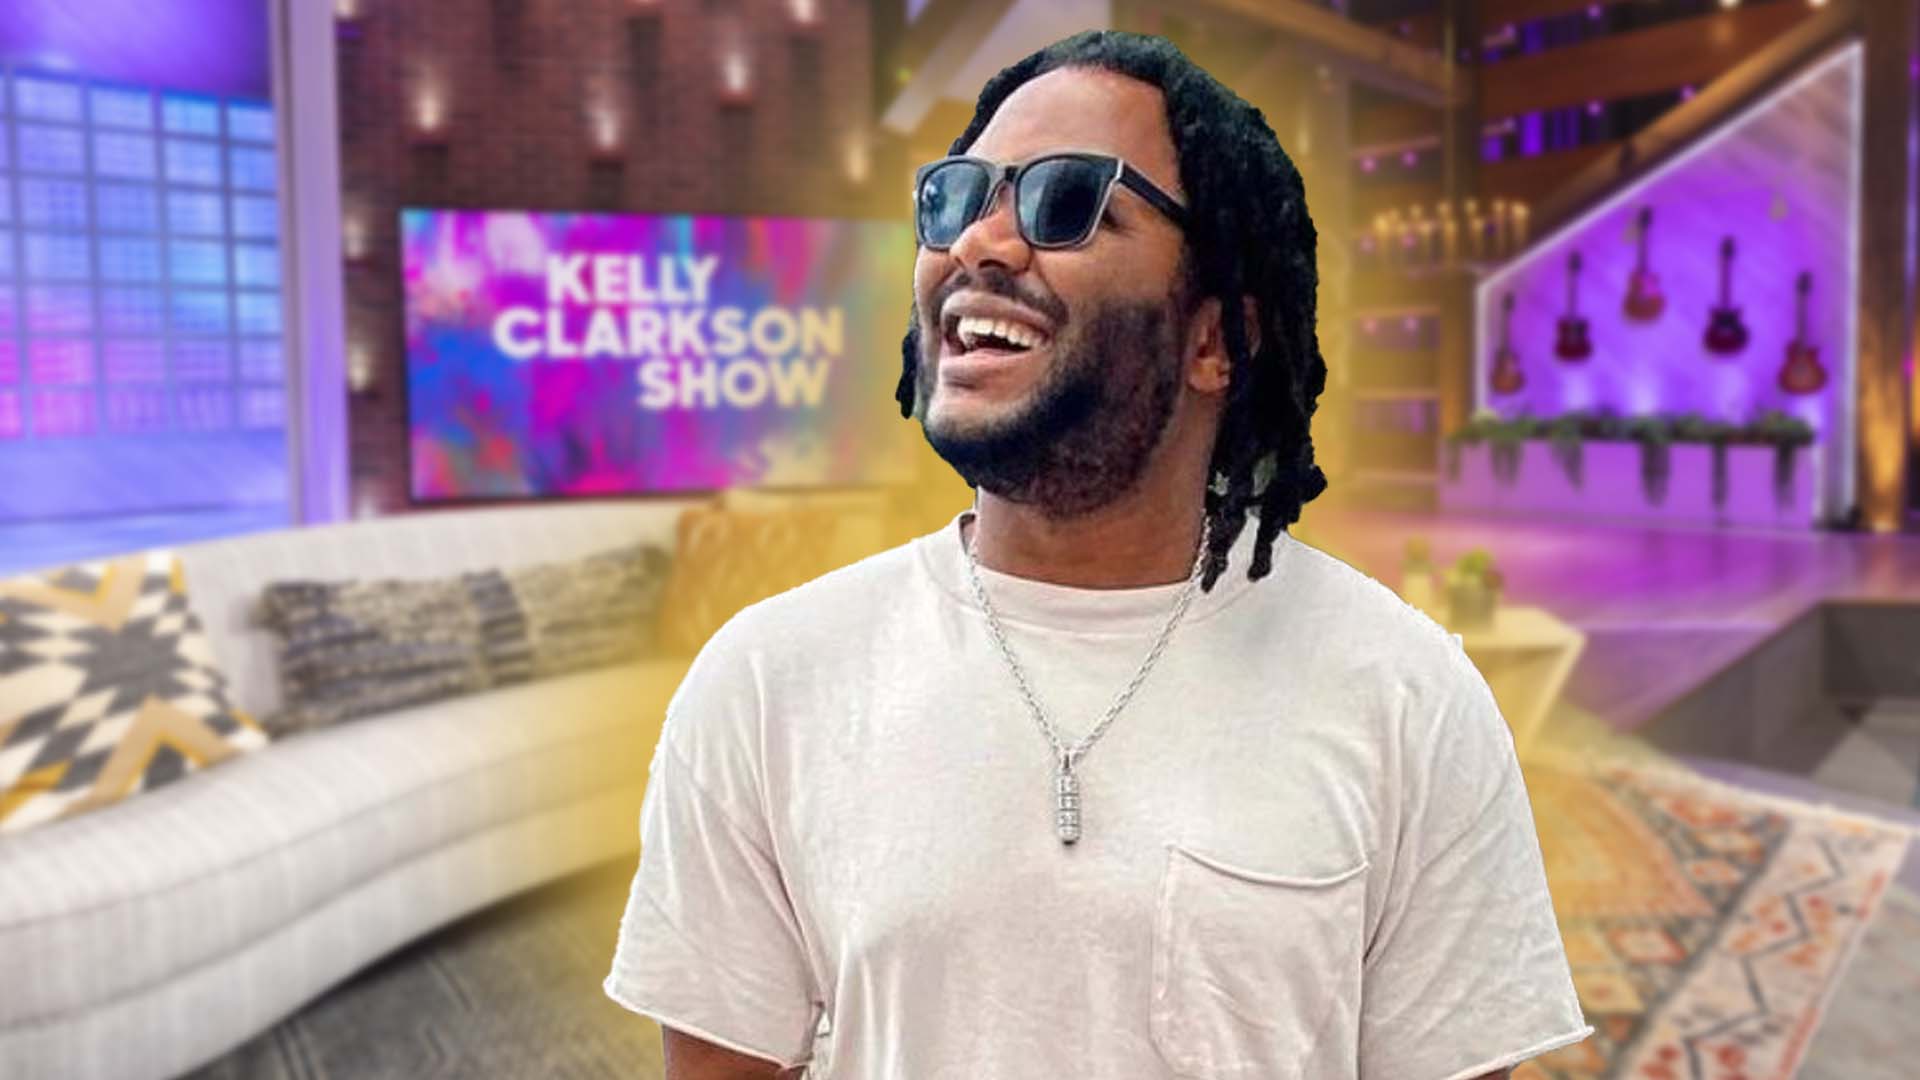 Blessing Offor sings "Brighter Days" on The Kelly Clarkson Show